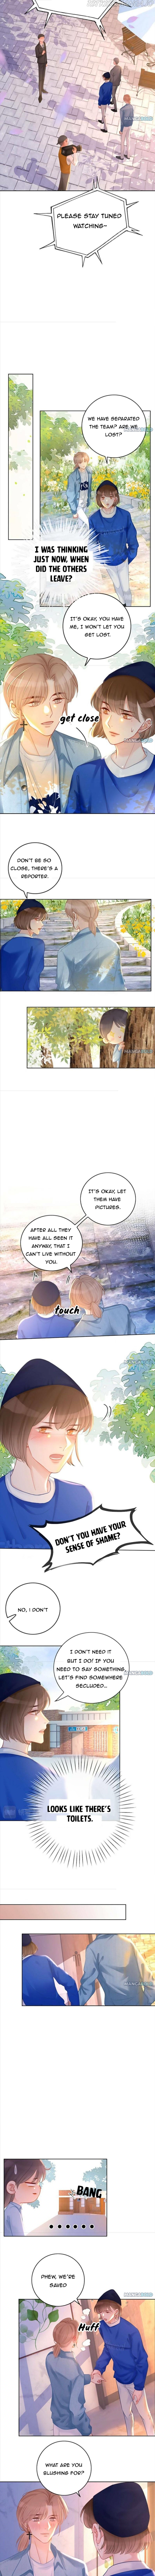 This Song Only For You - Page 2